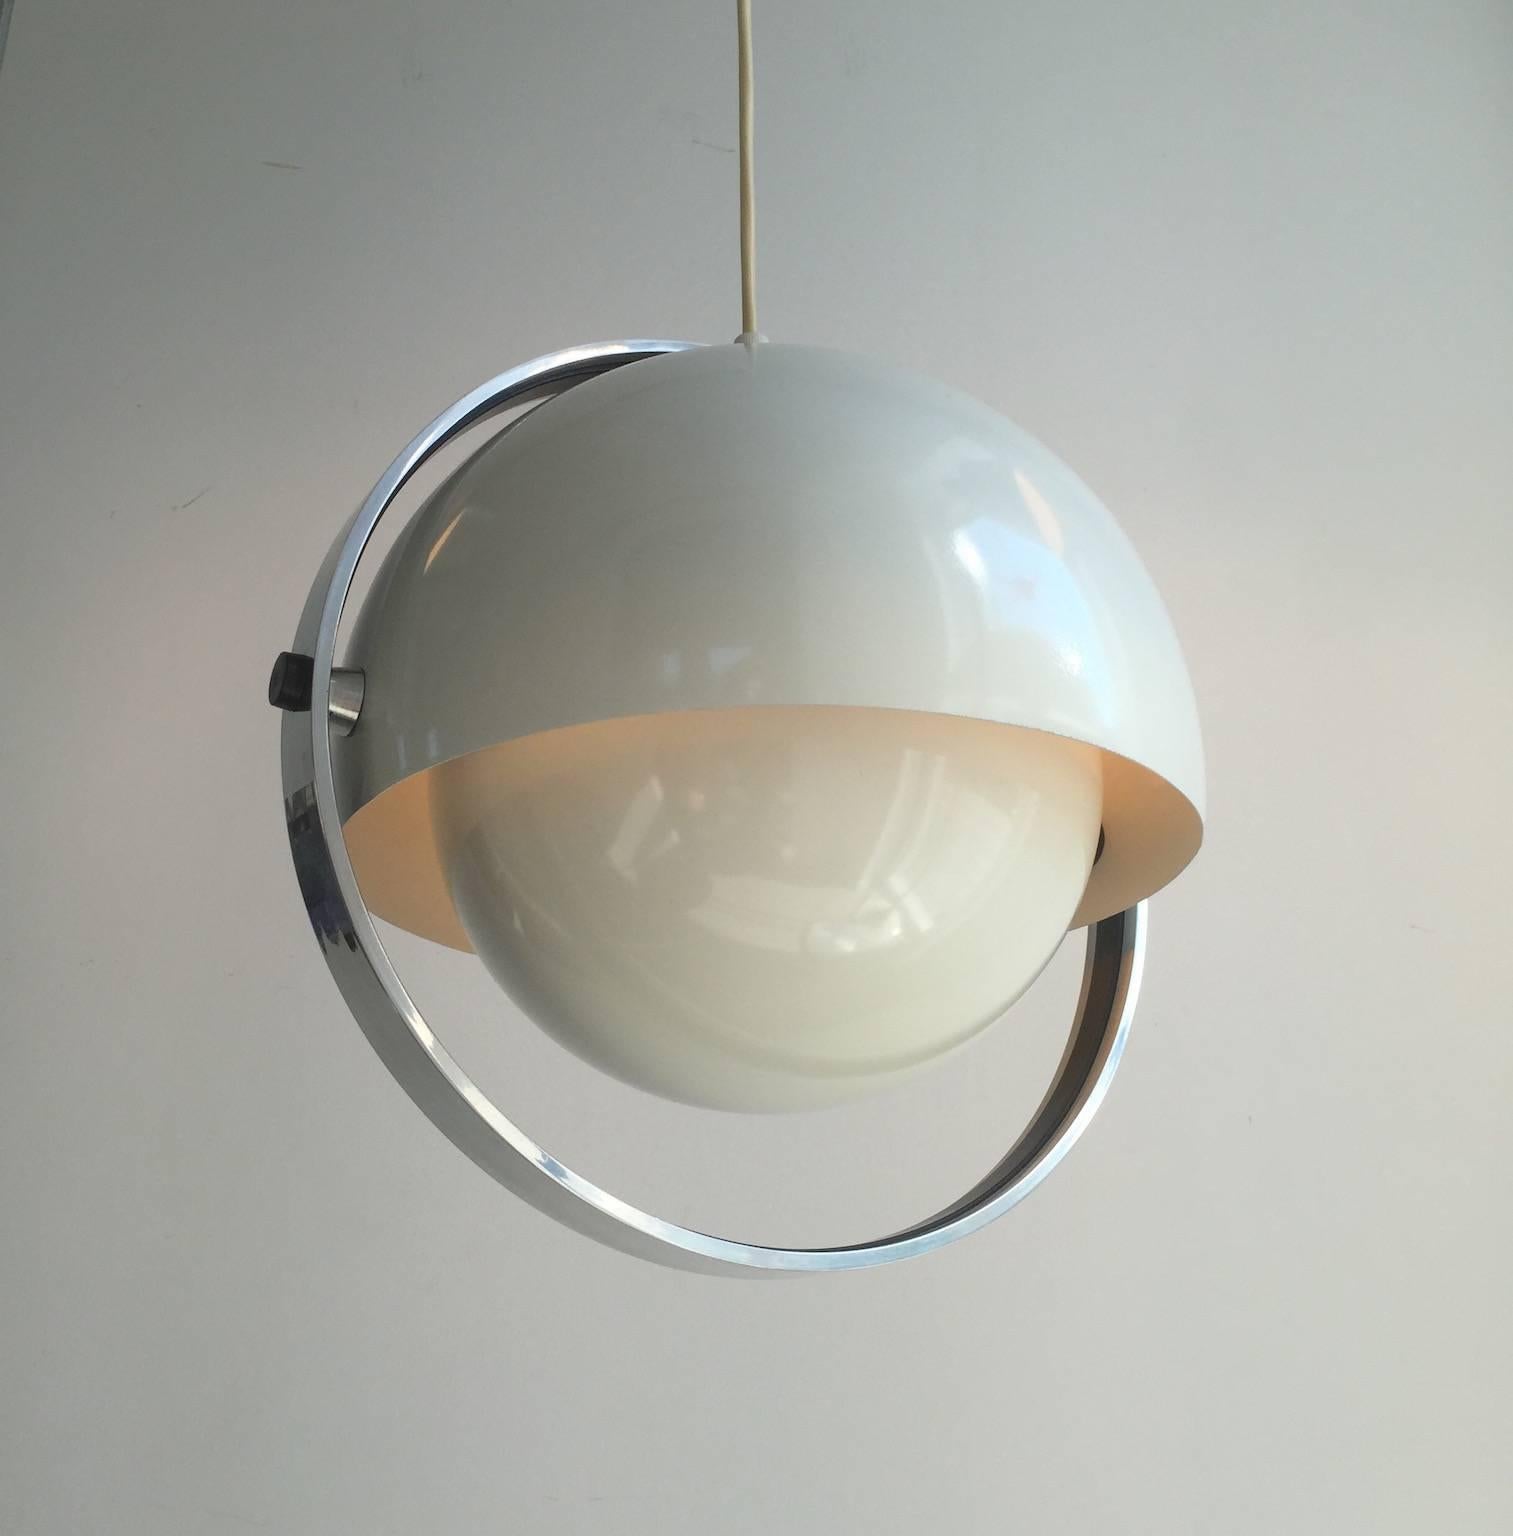 Lacquer Danish Mid-Century Pendant by Flemming Brylle and Preben Jakobsen